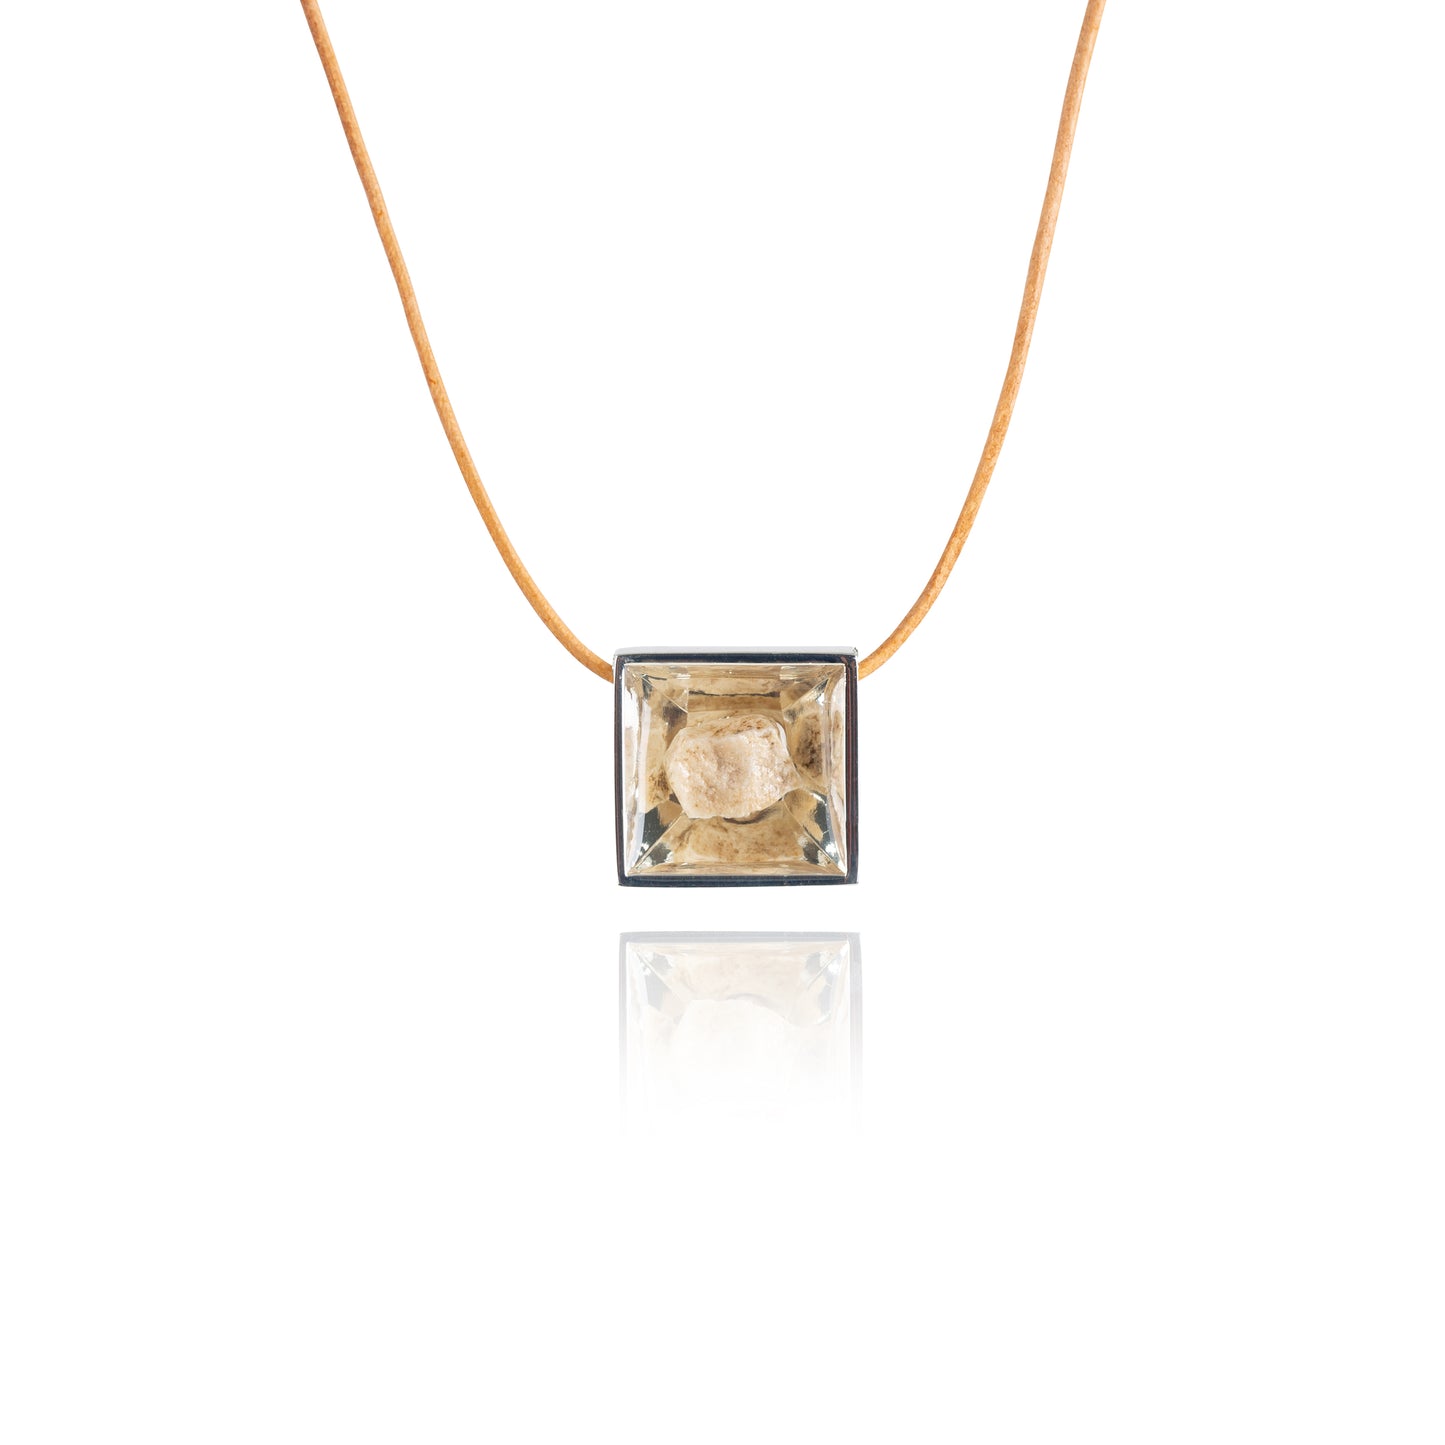 A small natural tan stone sitting in the middle of a square shaped metal pendant in a silver color. The pendant is hanging on a tan leather necklace.